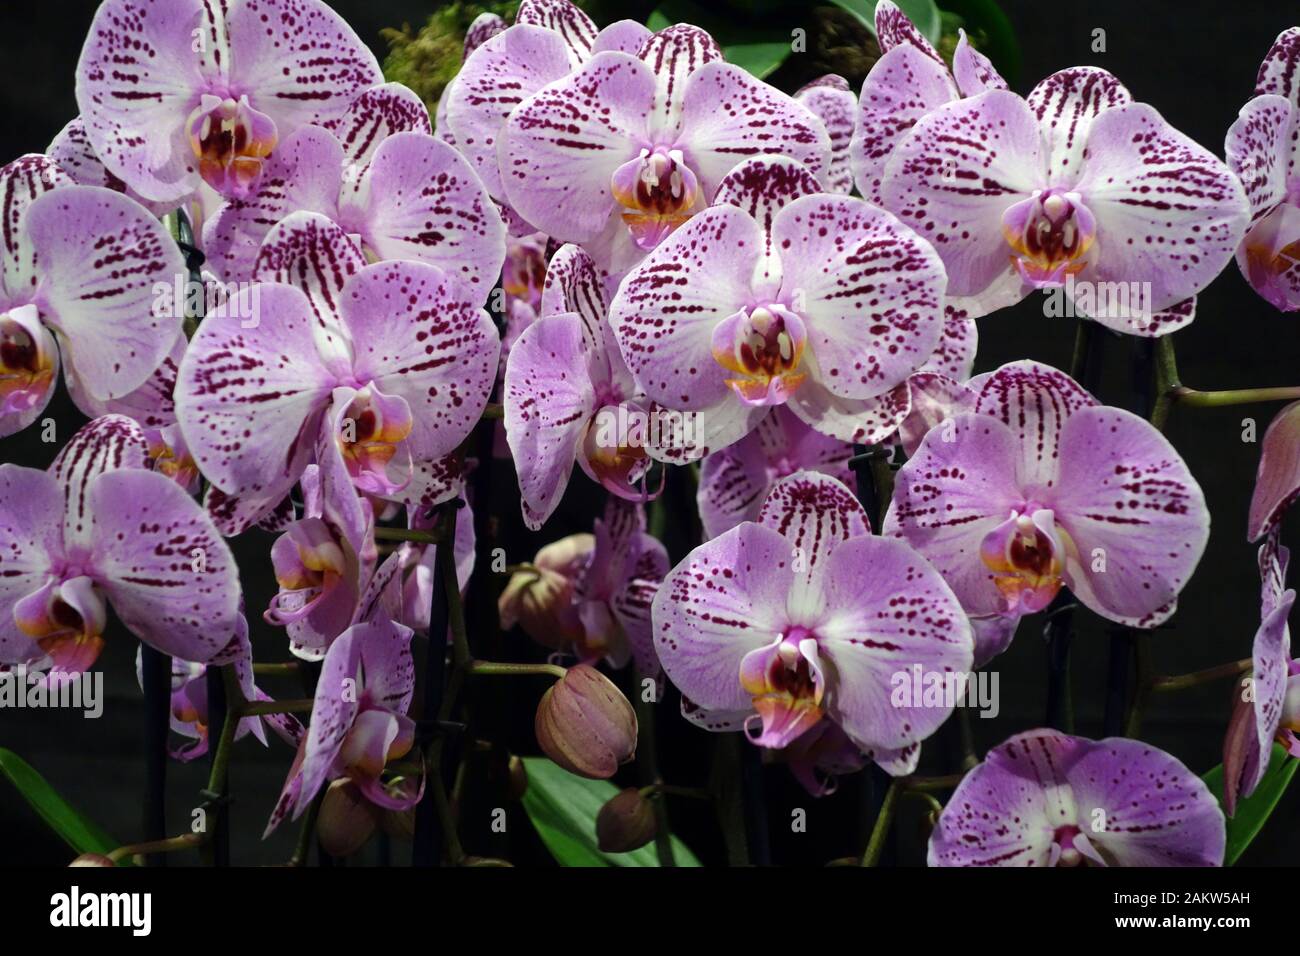 A Bunch of Pale Purple Phalaenopsis 'Kasshi' Moth Orchid Flowers on Display at the Harrogate Spring Flower Show. Yorkshire, England, UK. Stock Photo